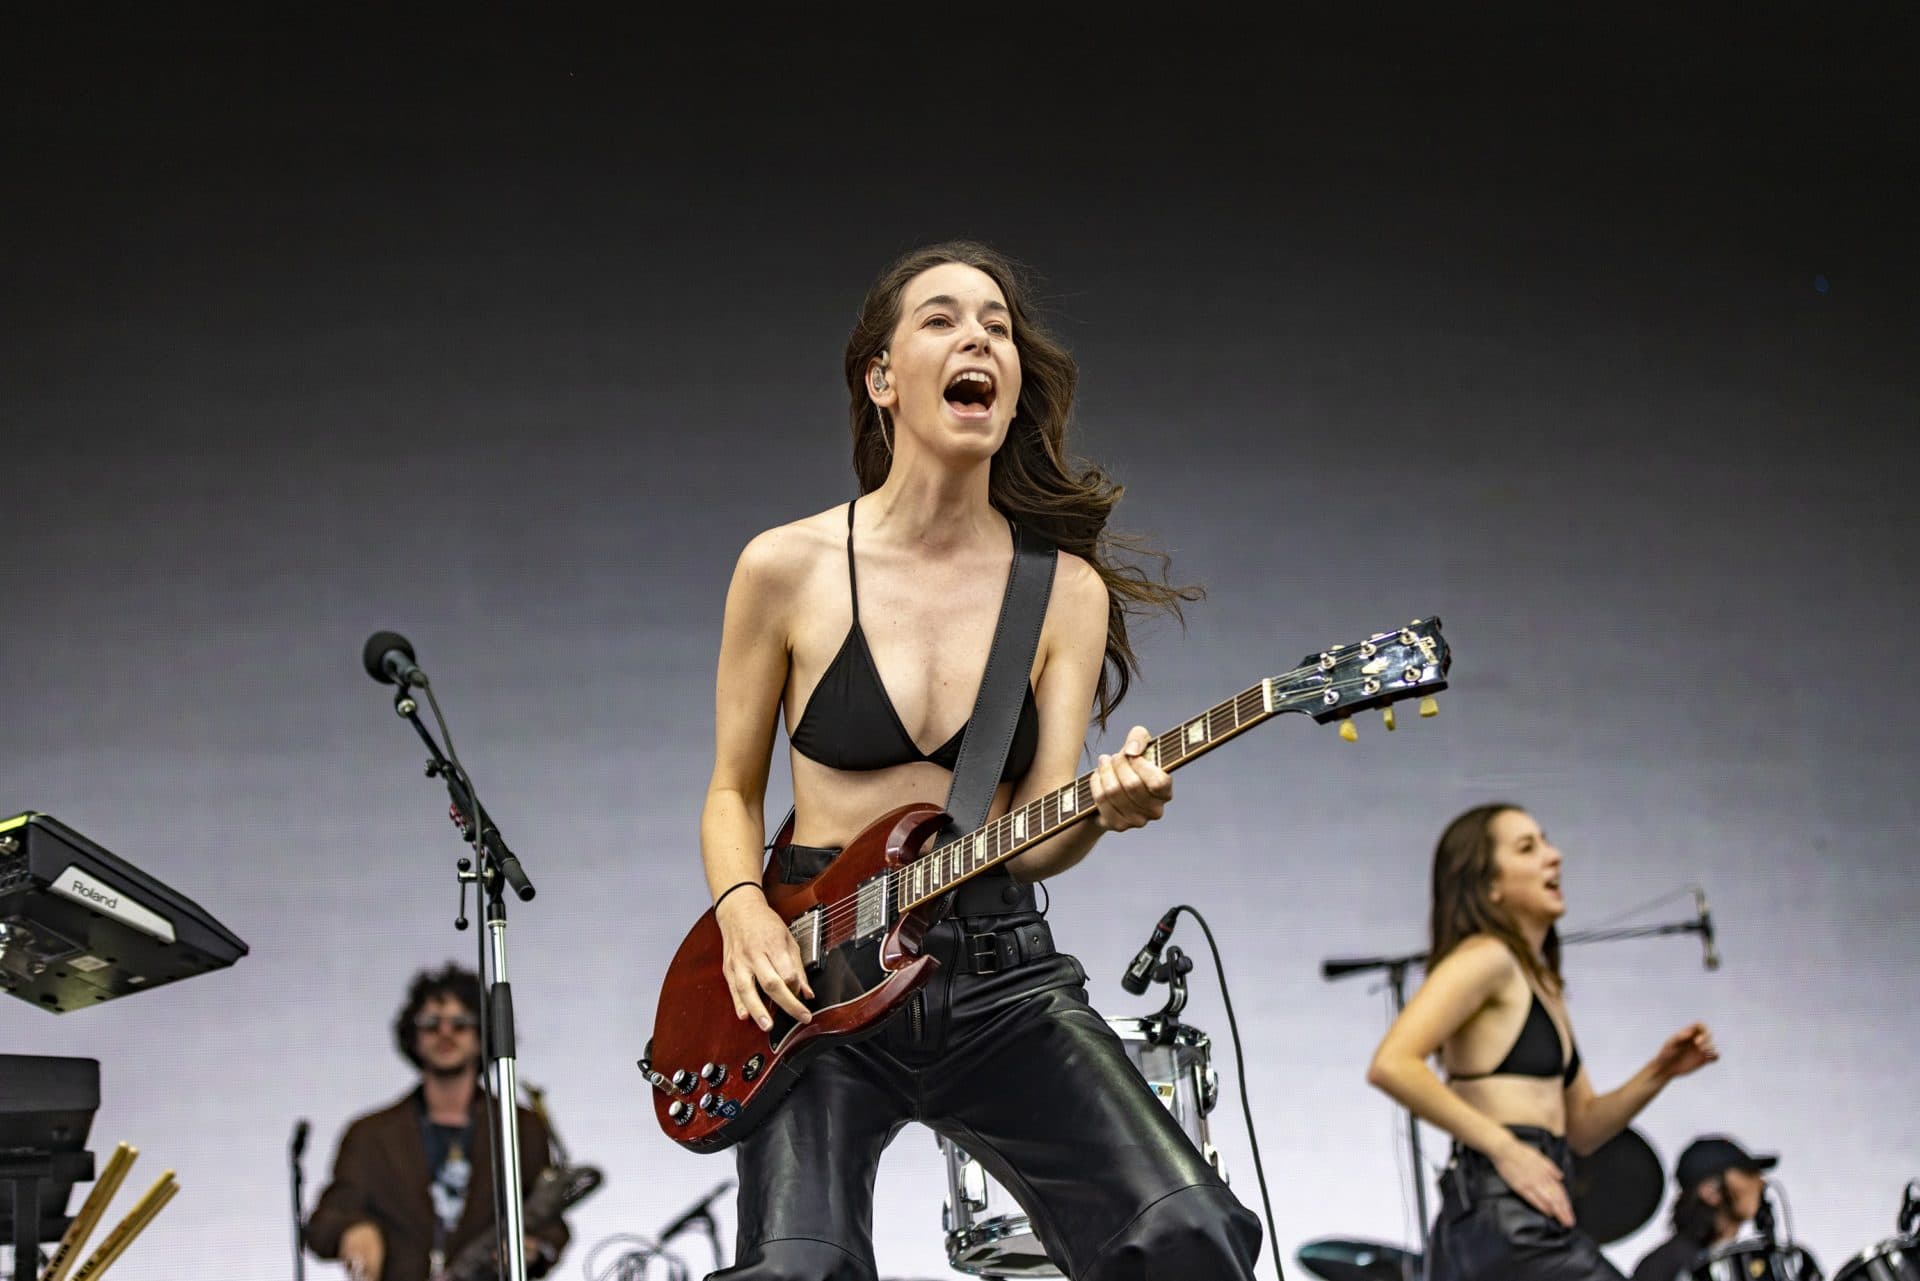 Danielle Haim plays guitar as sister Este runs out onto the stage at the beginning of their set at the Boston Calling Music Festival. (Jesse Costa/WBUR)